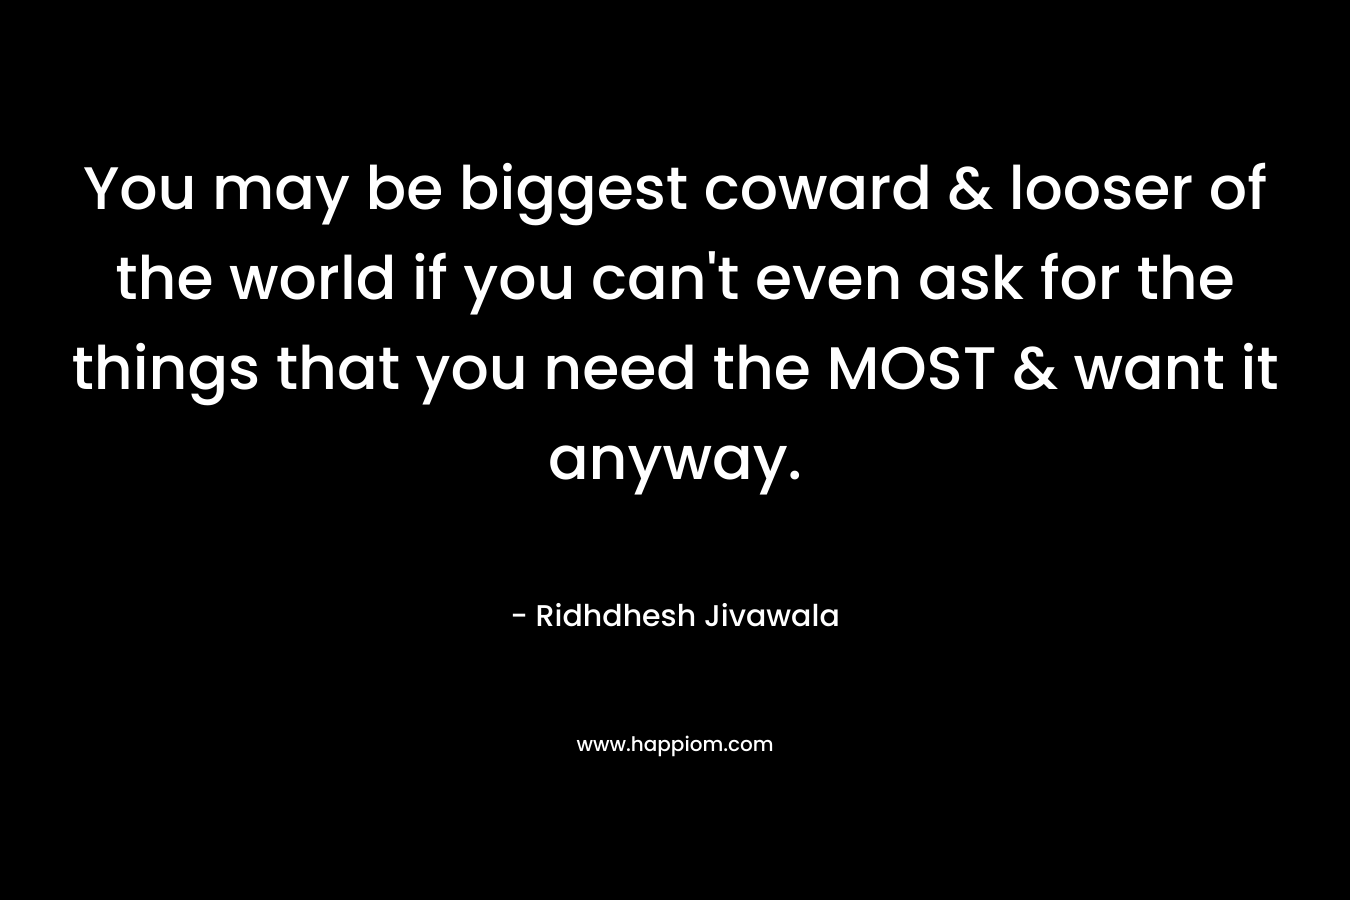 You may be biggest coward & looser of the world if you can't even ask for the things that you need the MOST & want it anyway.